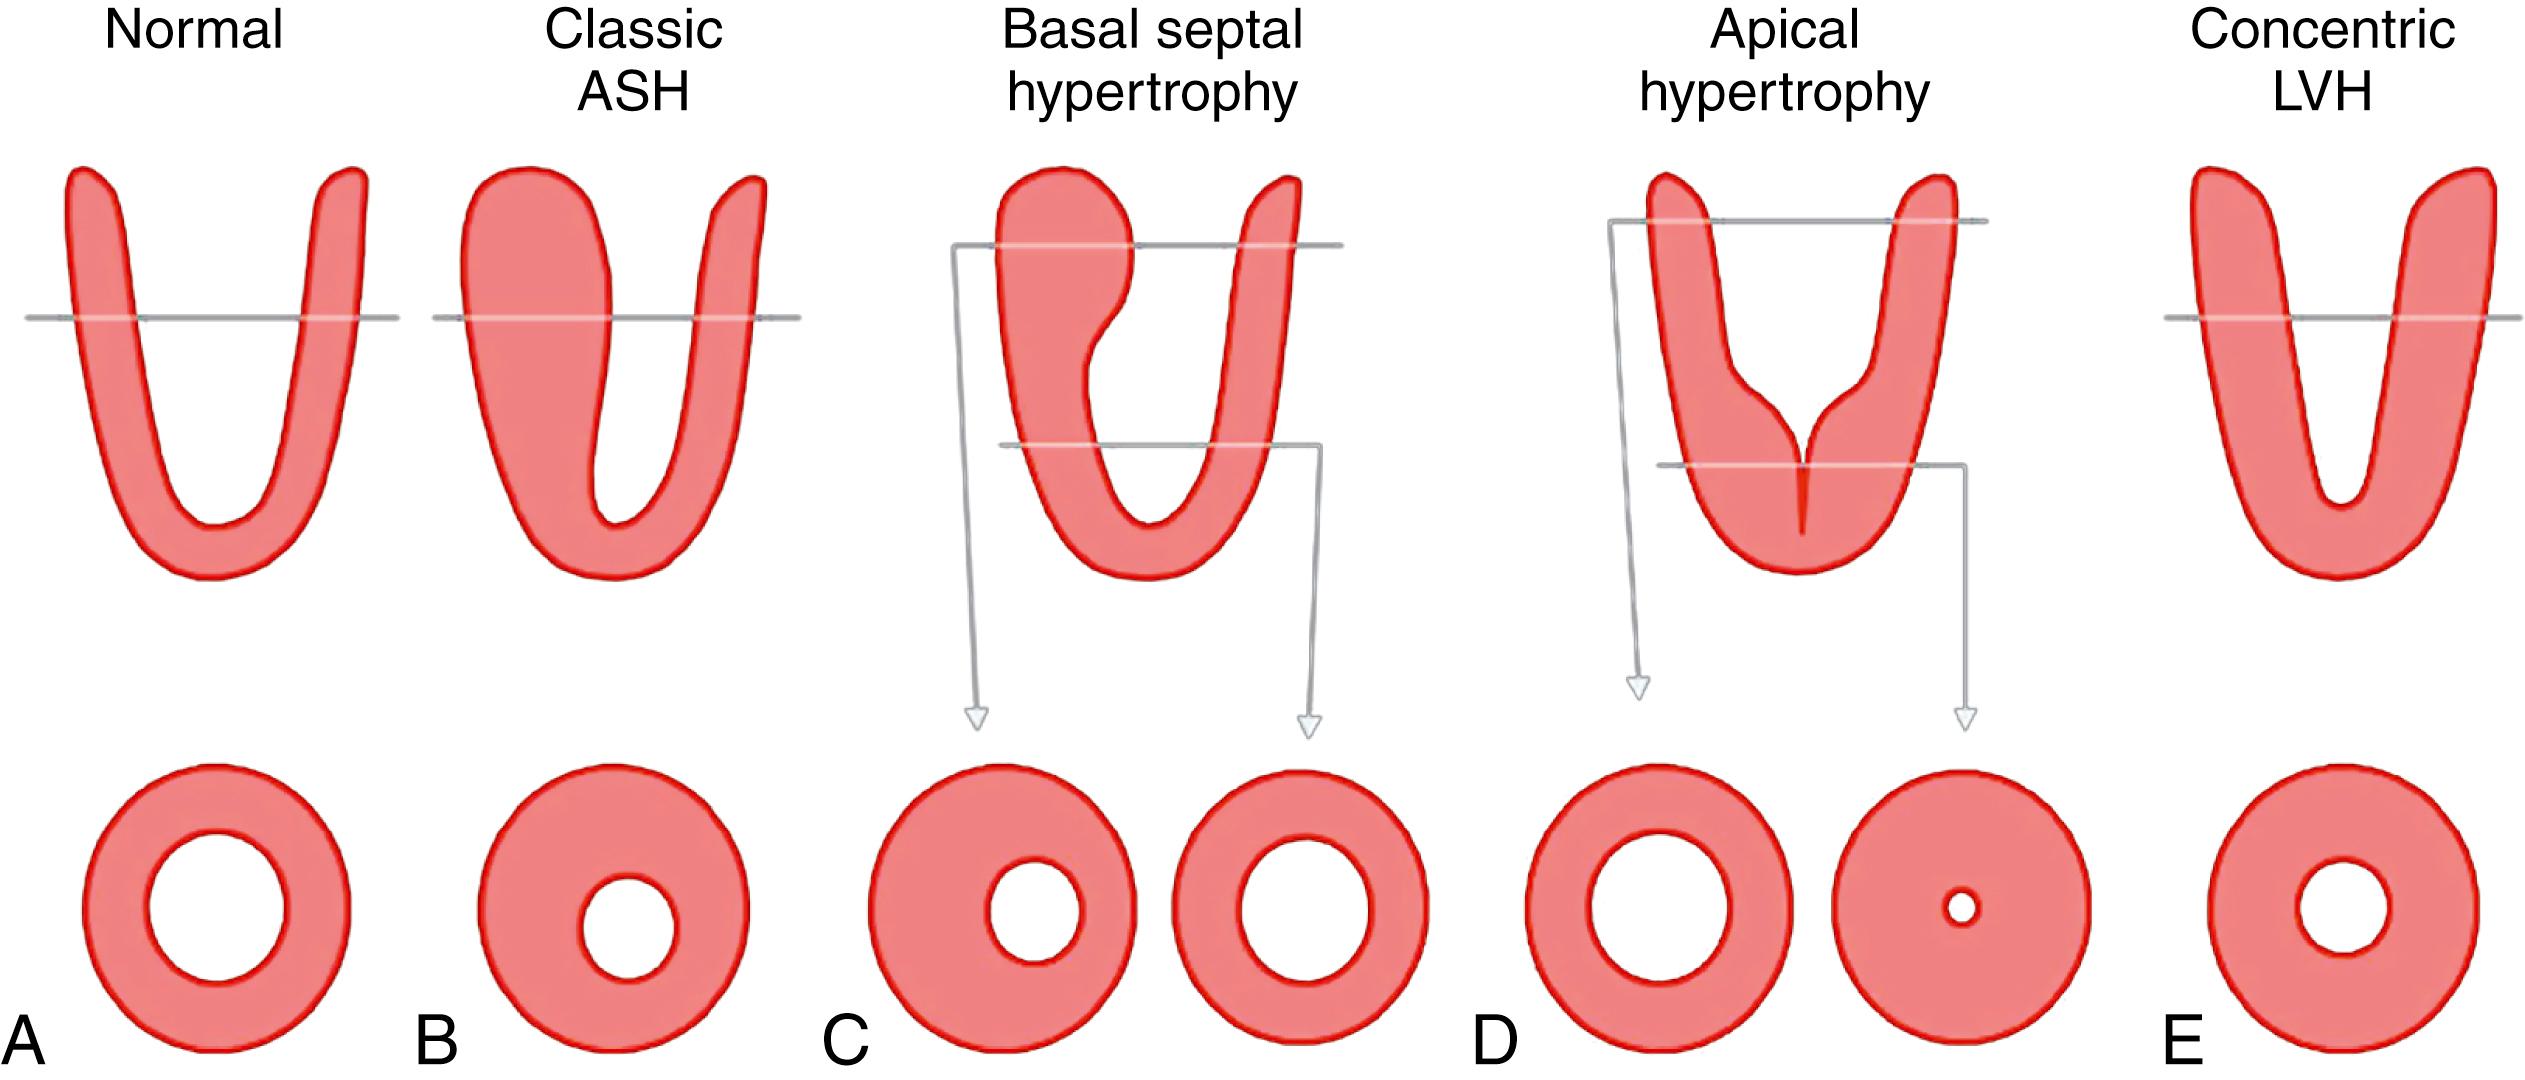 Figure 63.2, Diagram of the left ventricle in longitudinal (upper row) and short-axis, cross-sectional view (lower row) illustrating the variable distribution of hypertrophy in a normal ventricle ( A ), three subtypes of hypertrophic cardiomyopathy ( B–D ), and concentric hypertrophy ( E ). C and D, The distribution at basal and apical levels. Note the similarity of this diagram to the magnetic resonance imaging of a patient in Fig. 63.3. ASH, Asymmetric septal hypertrophy; LVH, left ventricular hypertrophy.